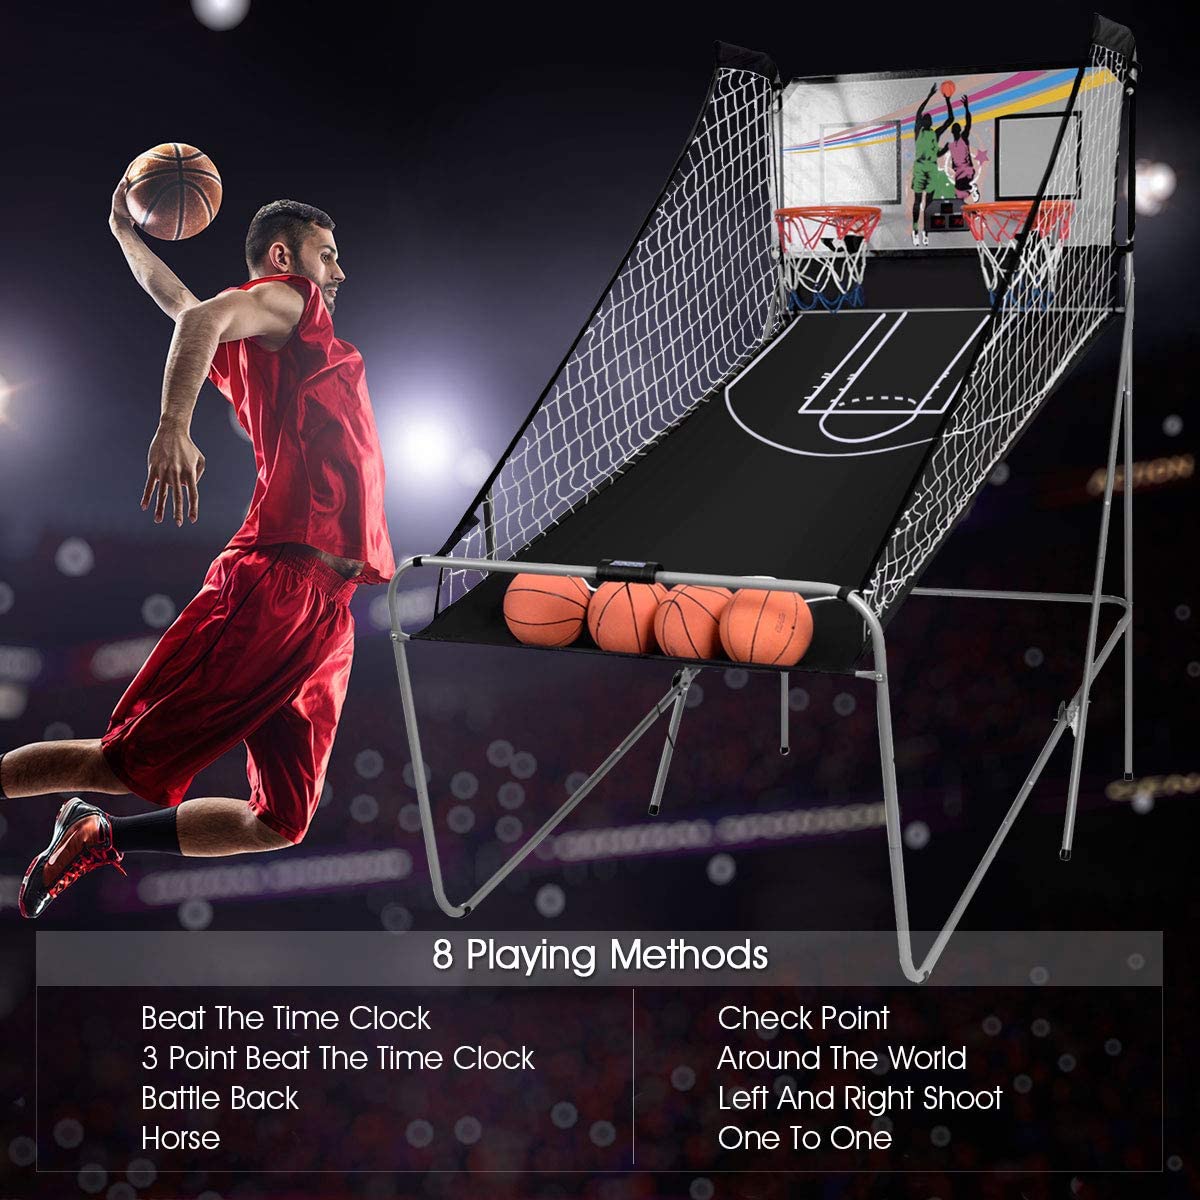 Chairliving Indoor Foldable Basketball Arcade Game with 4 Balls and LED Scoring System for Adults Kids